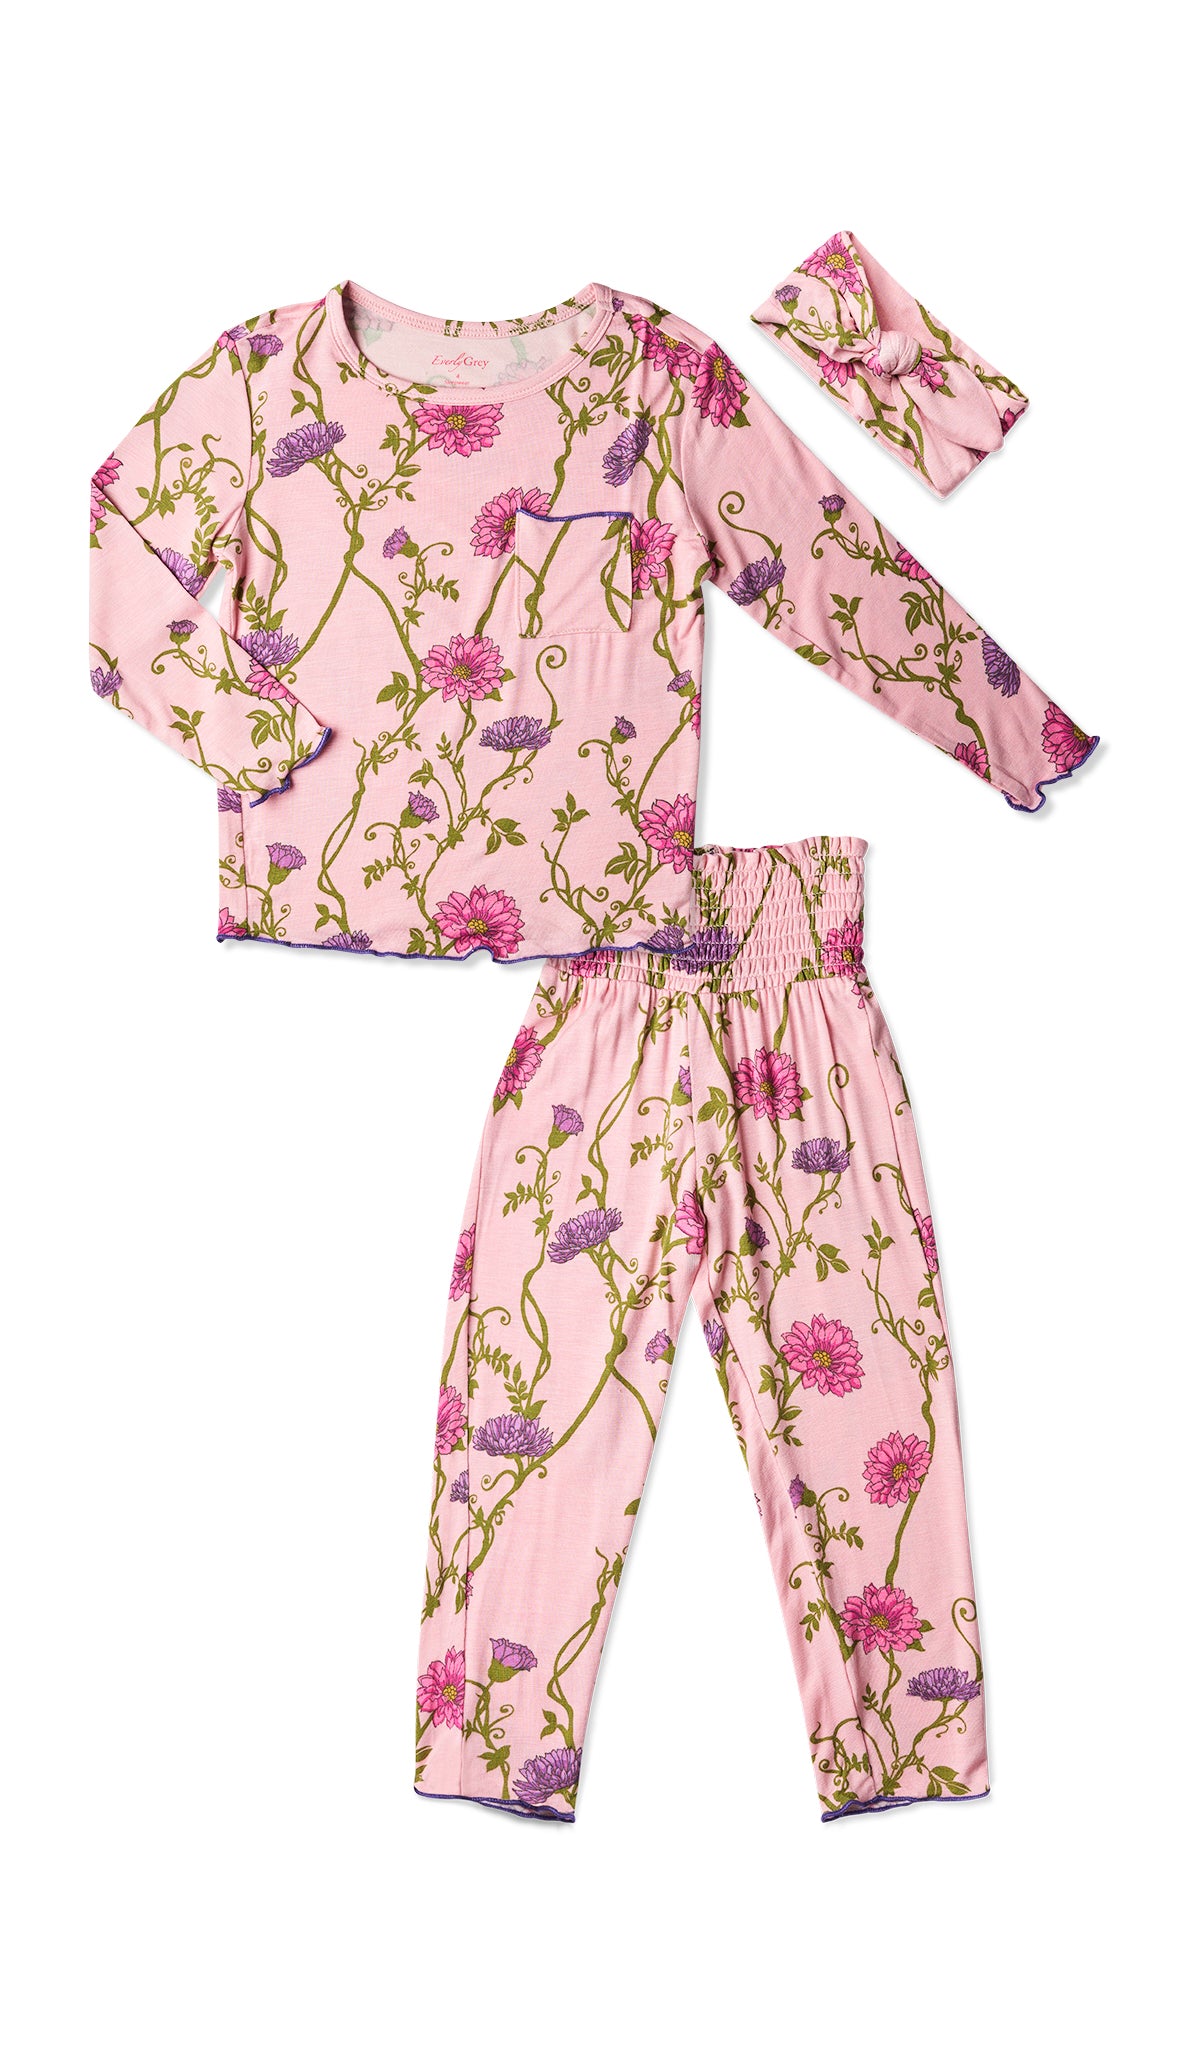 Dahlia Charlie Kids 3-Piece Pant PJ. Long sleeve top with smocked waistband pant and matching headwrap. Lettuce trim detail on sleeve edge, top and pant hem.